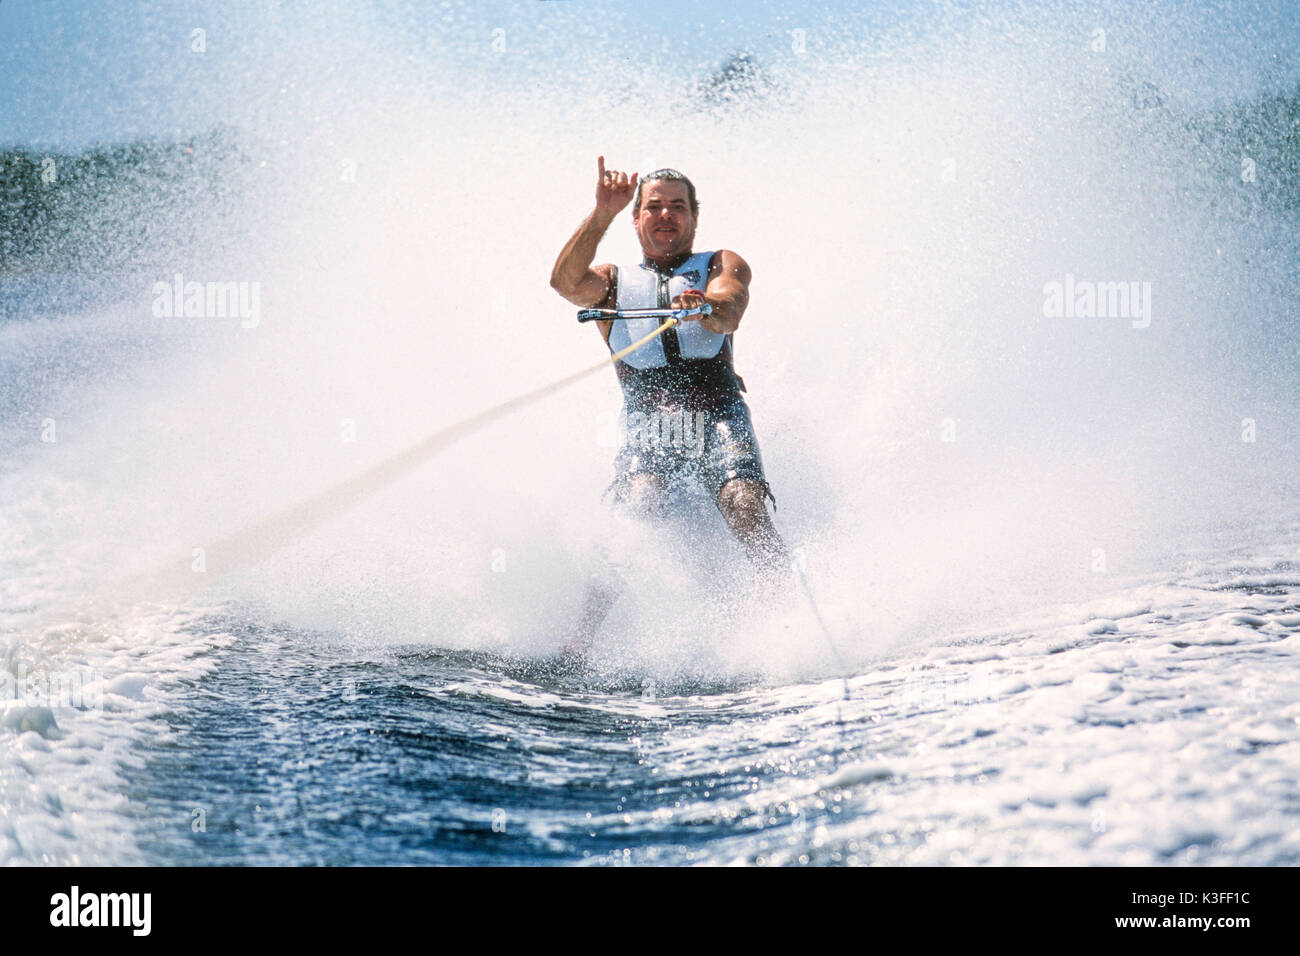 Barefooted water-ski driver shows Hang-Loose gesture Stock Photo